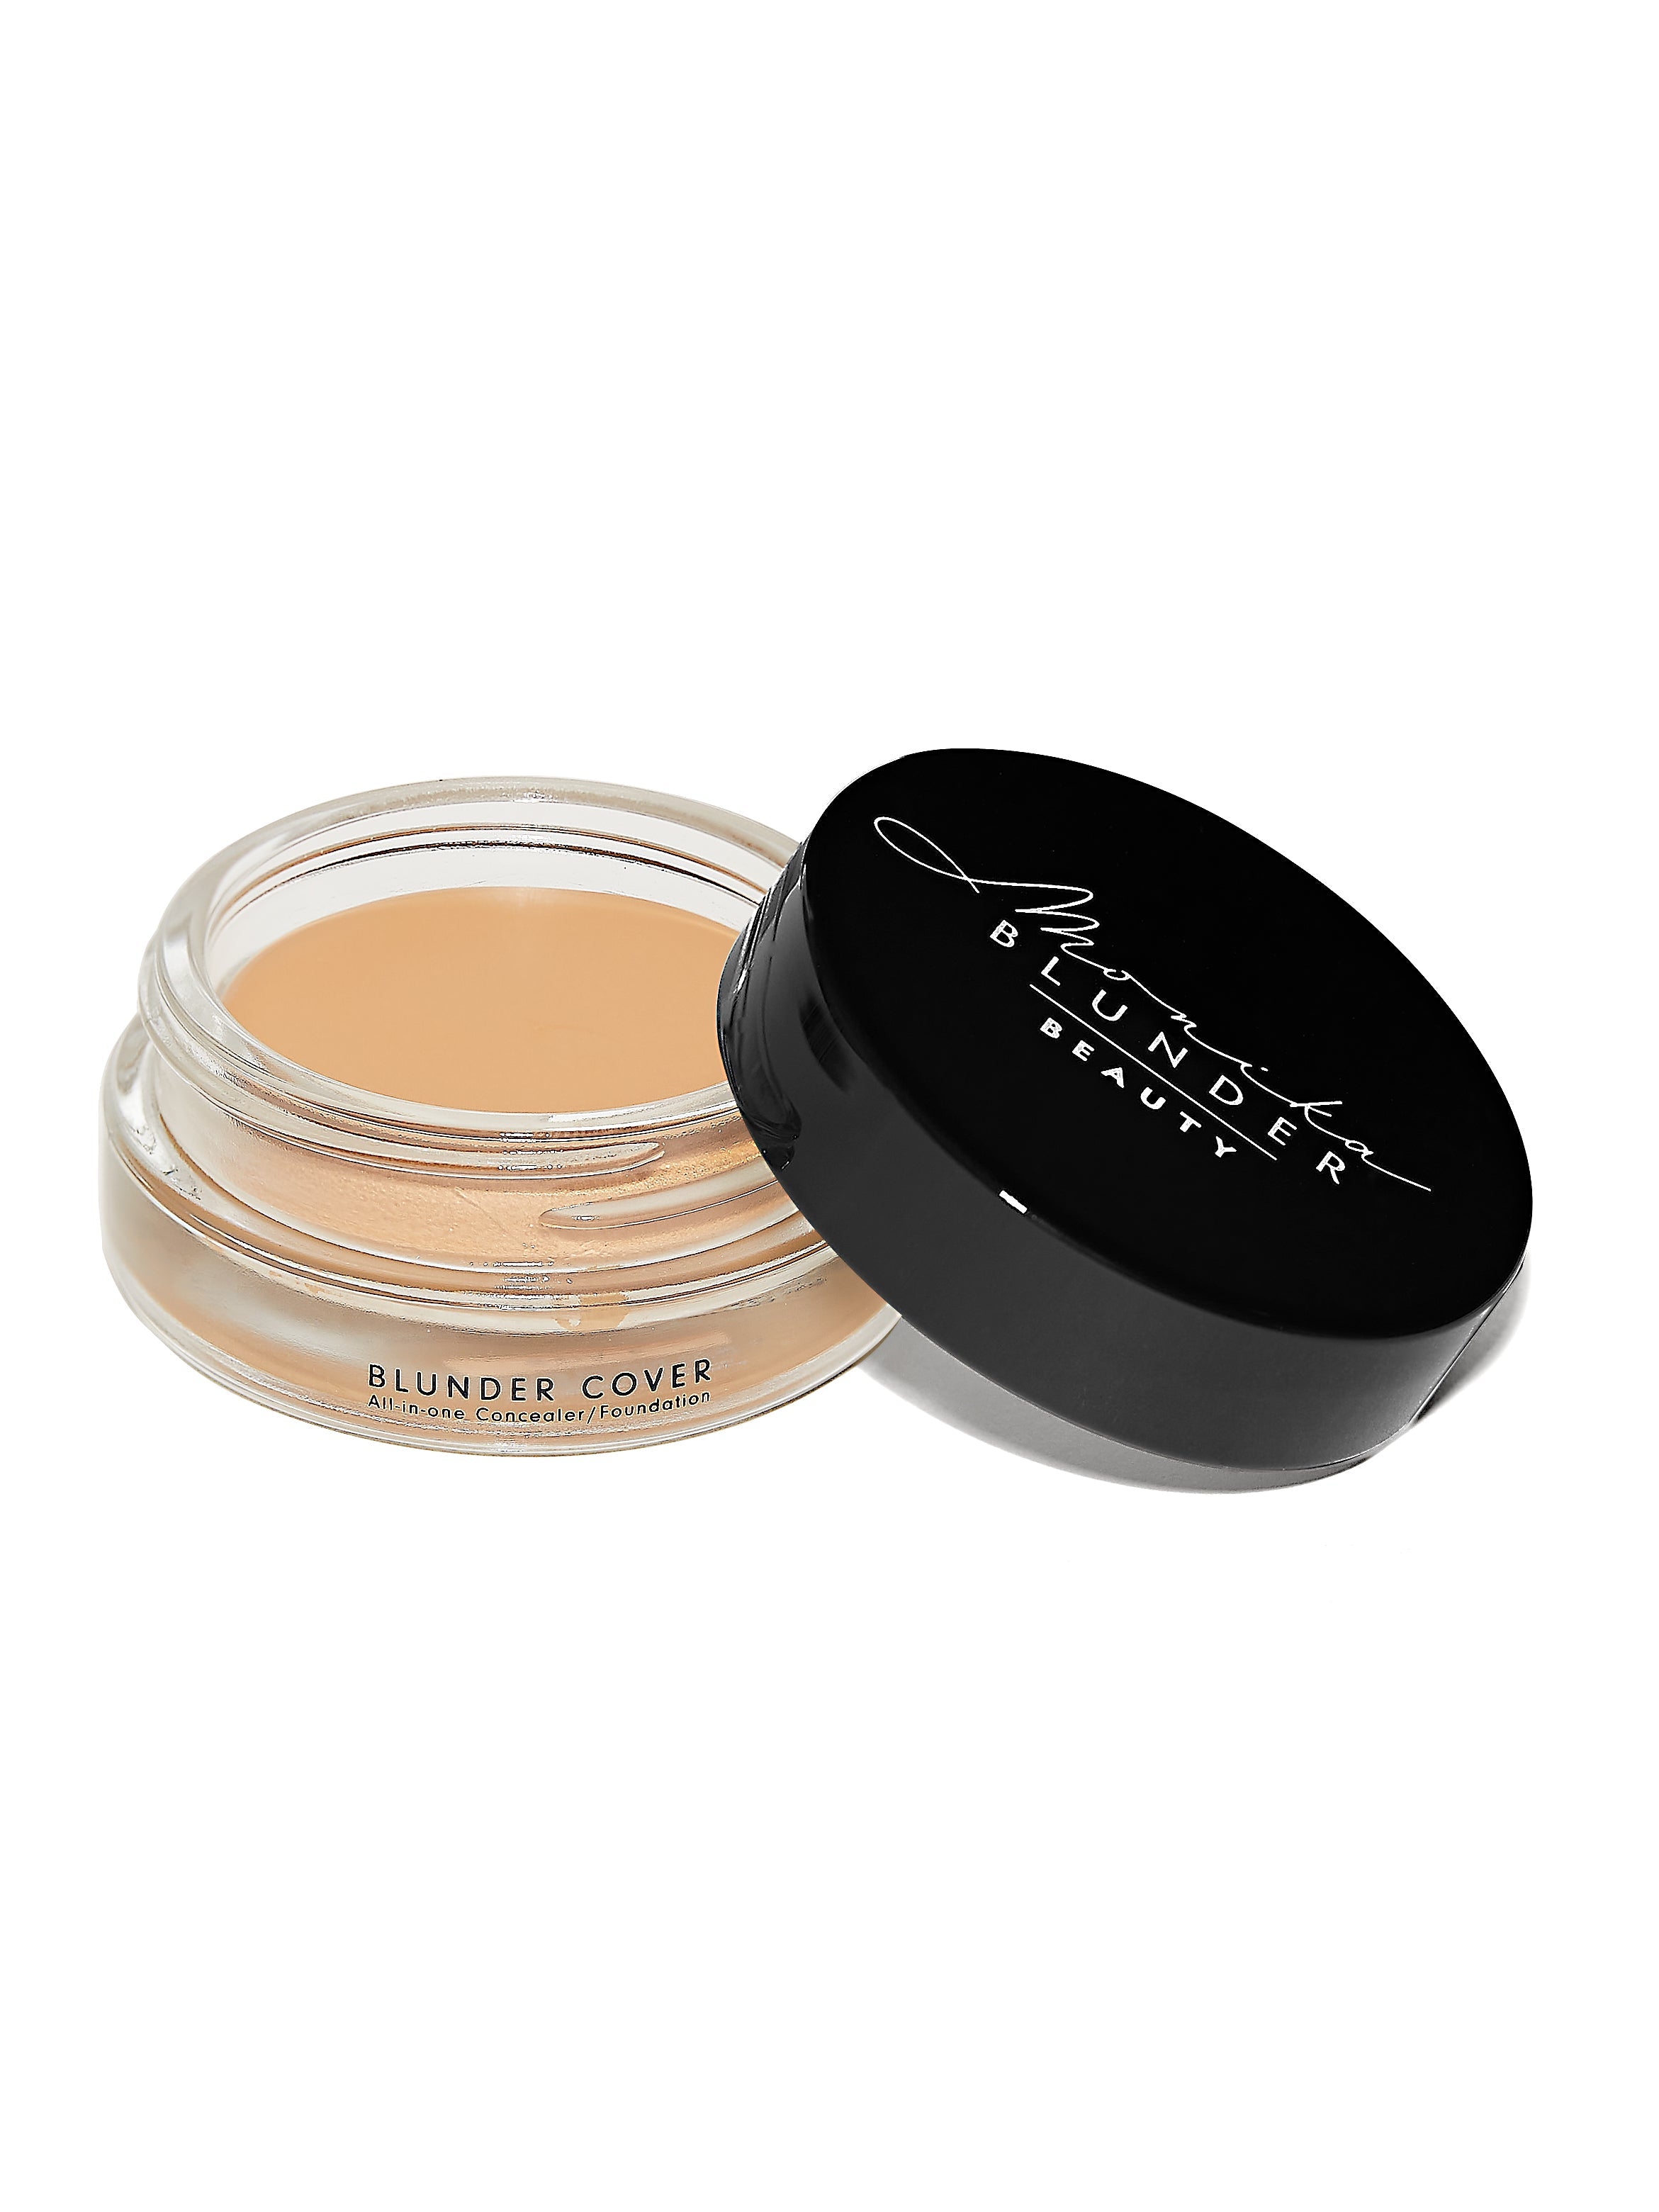 Blunder Cover an All-In-One Foundation/Concealer Shade-Vier - 0